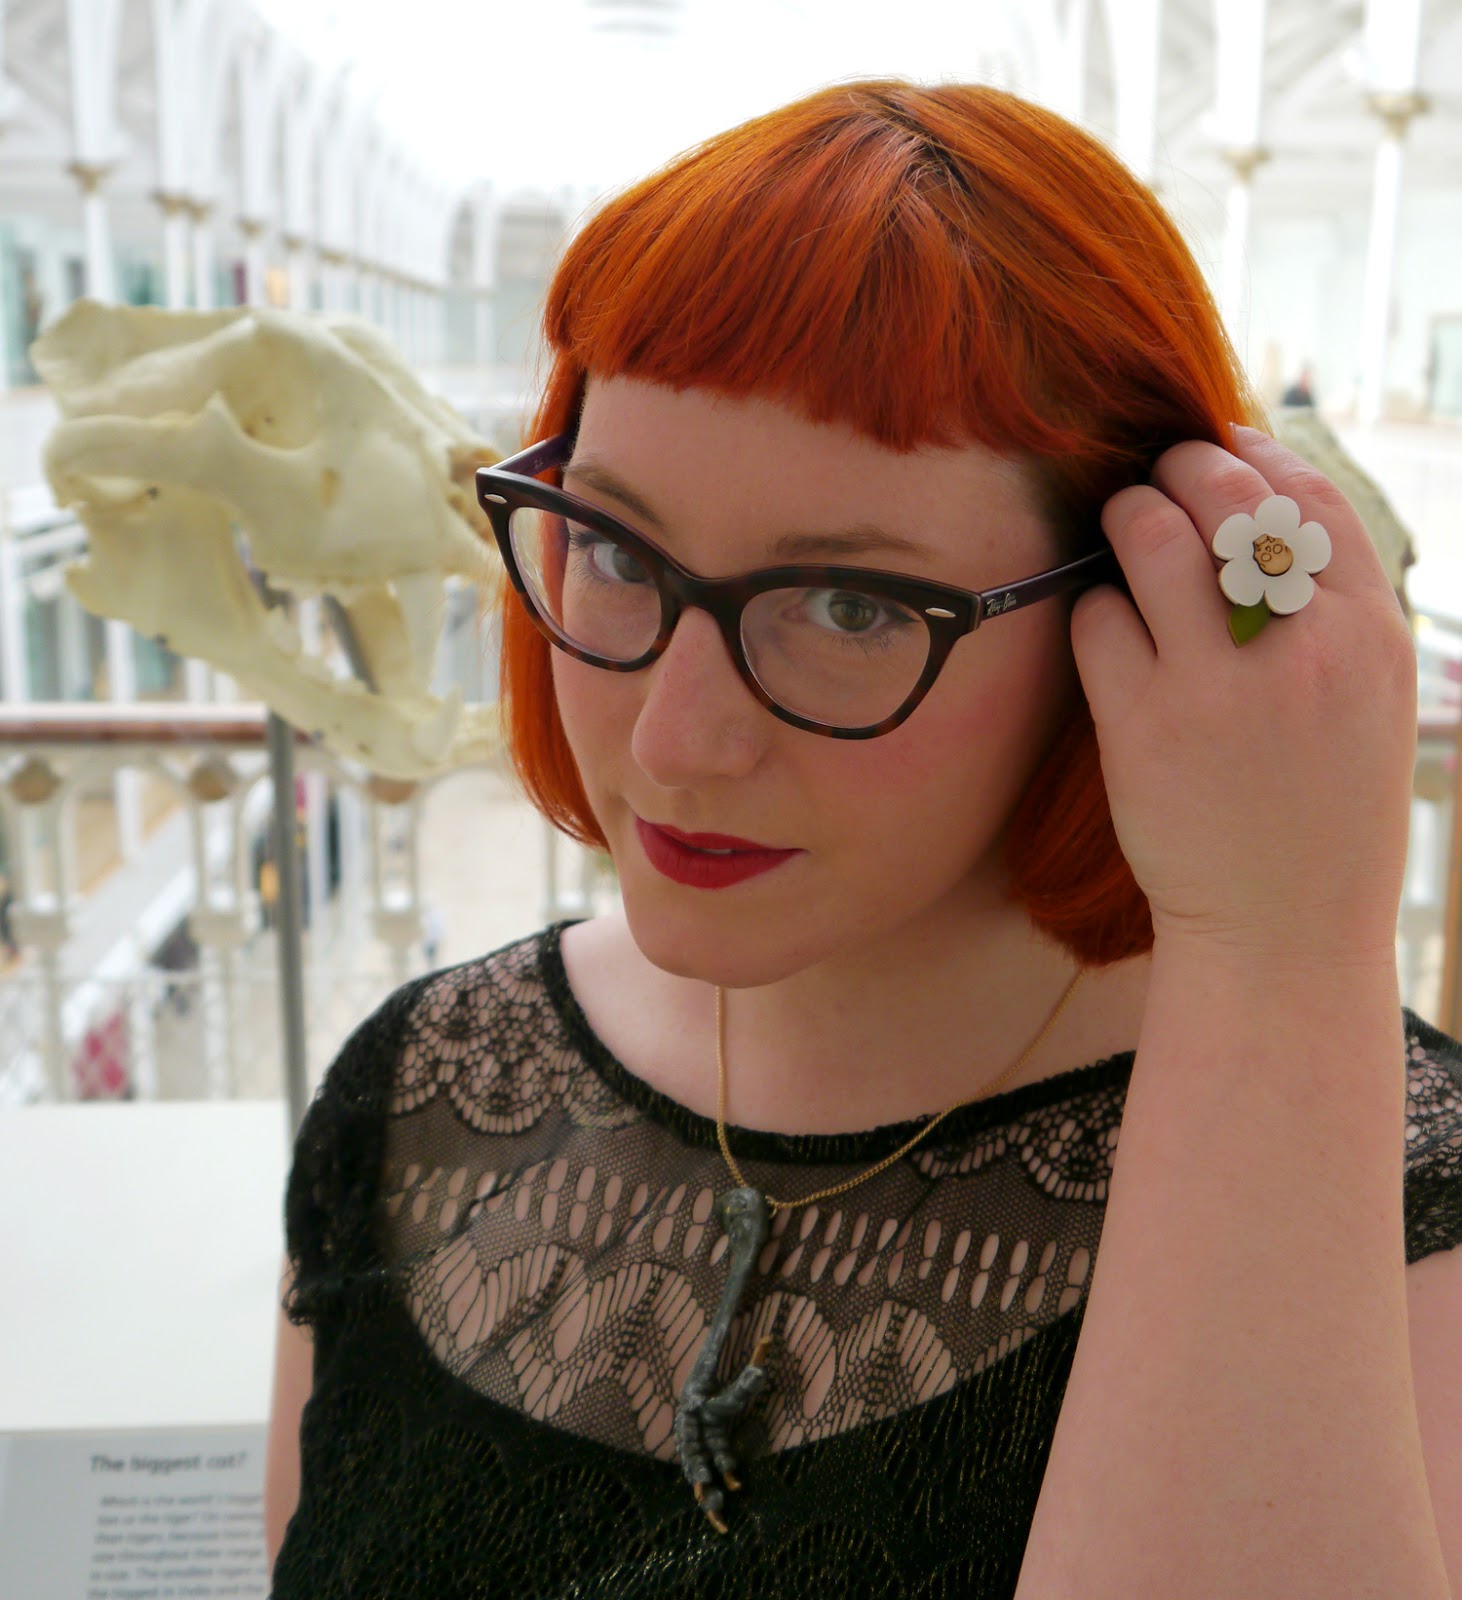 National Museum of Scotland, museum, scottish bloggers, edinburgh, edinburgh bloggers, Danie Mellor, outfit, Runaway fox, taxidermy jewellery, claw necklace, 1920s style, Styled by Helen, ginger hair, red head, The Edinburgh Casting Studio, animal friendly taxidermy